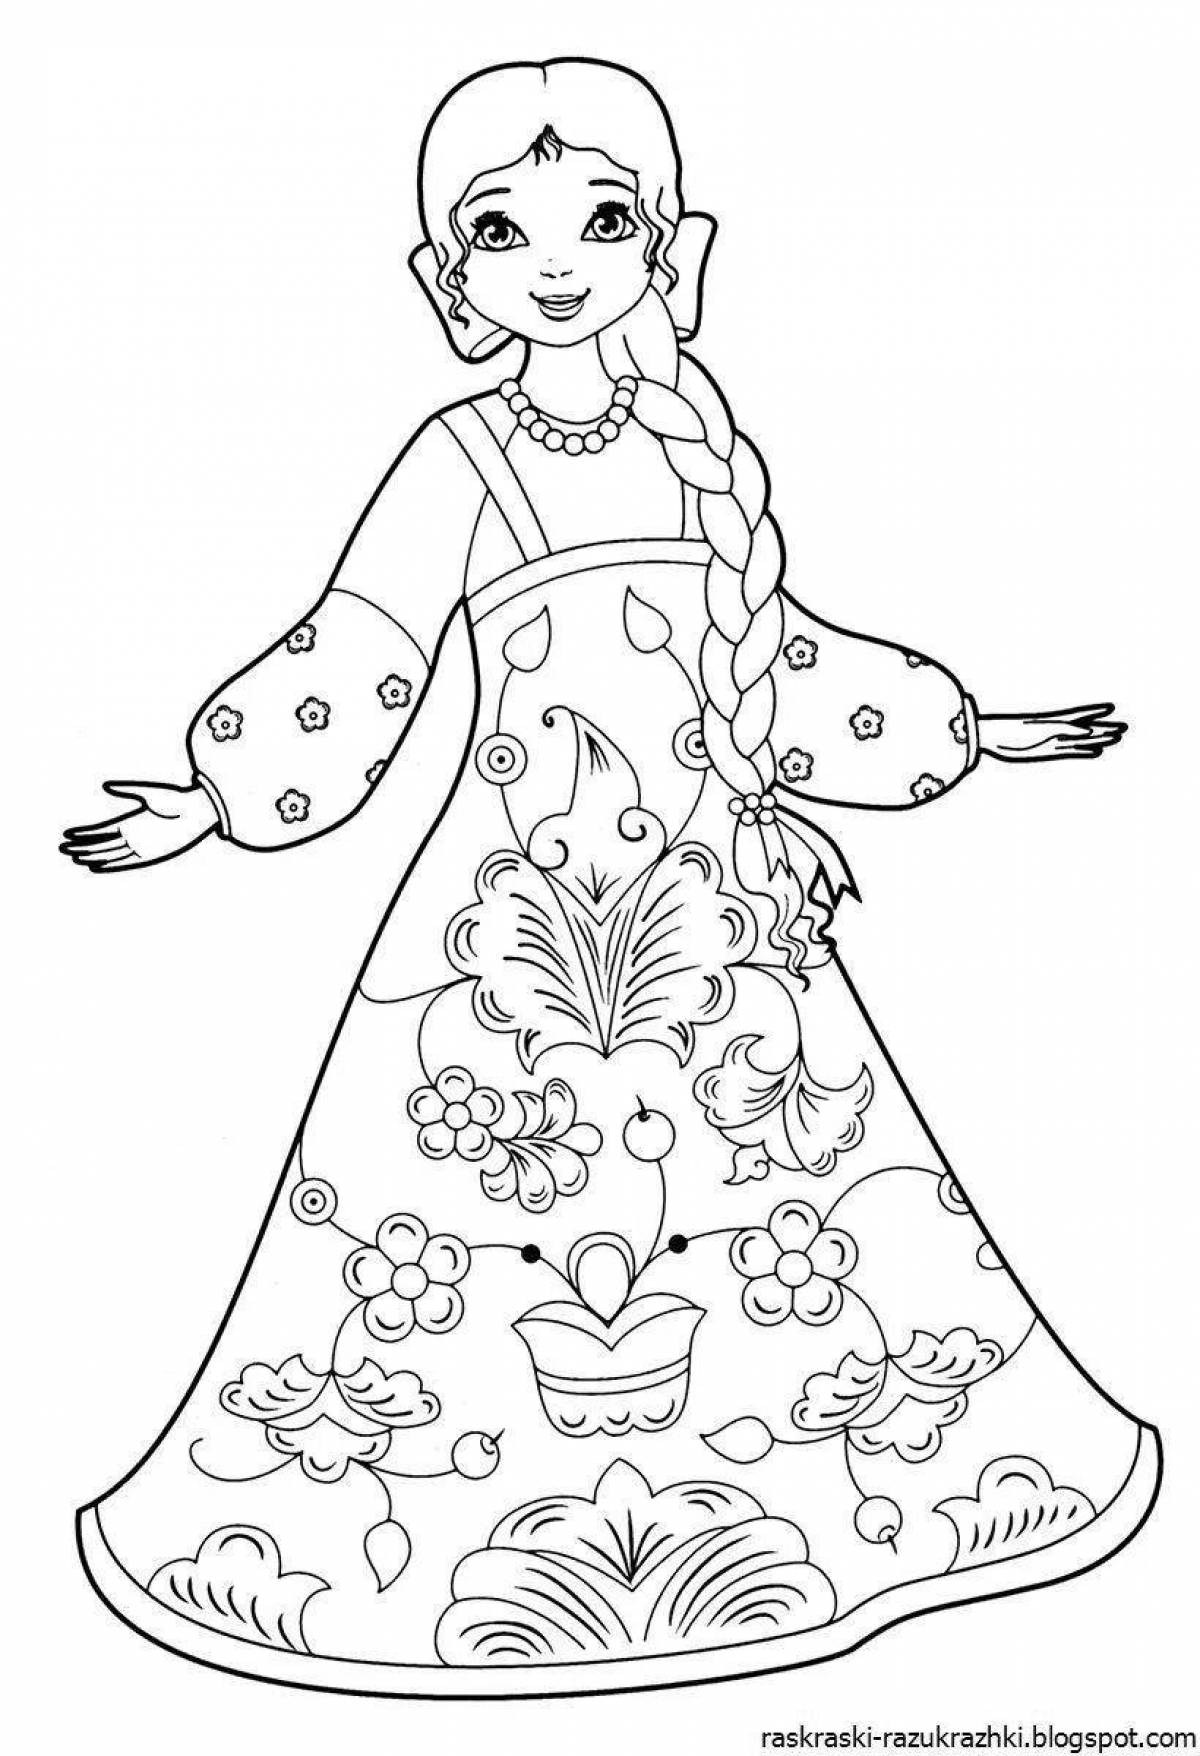 Coloring page festive Russian sundress